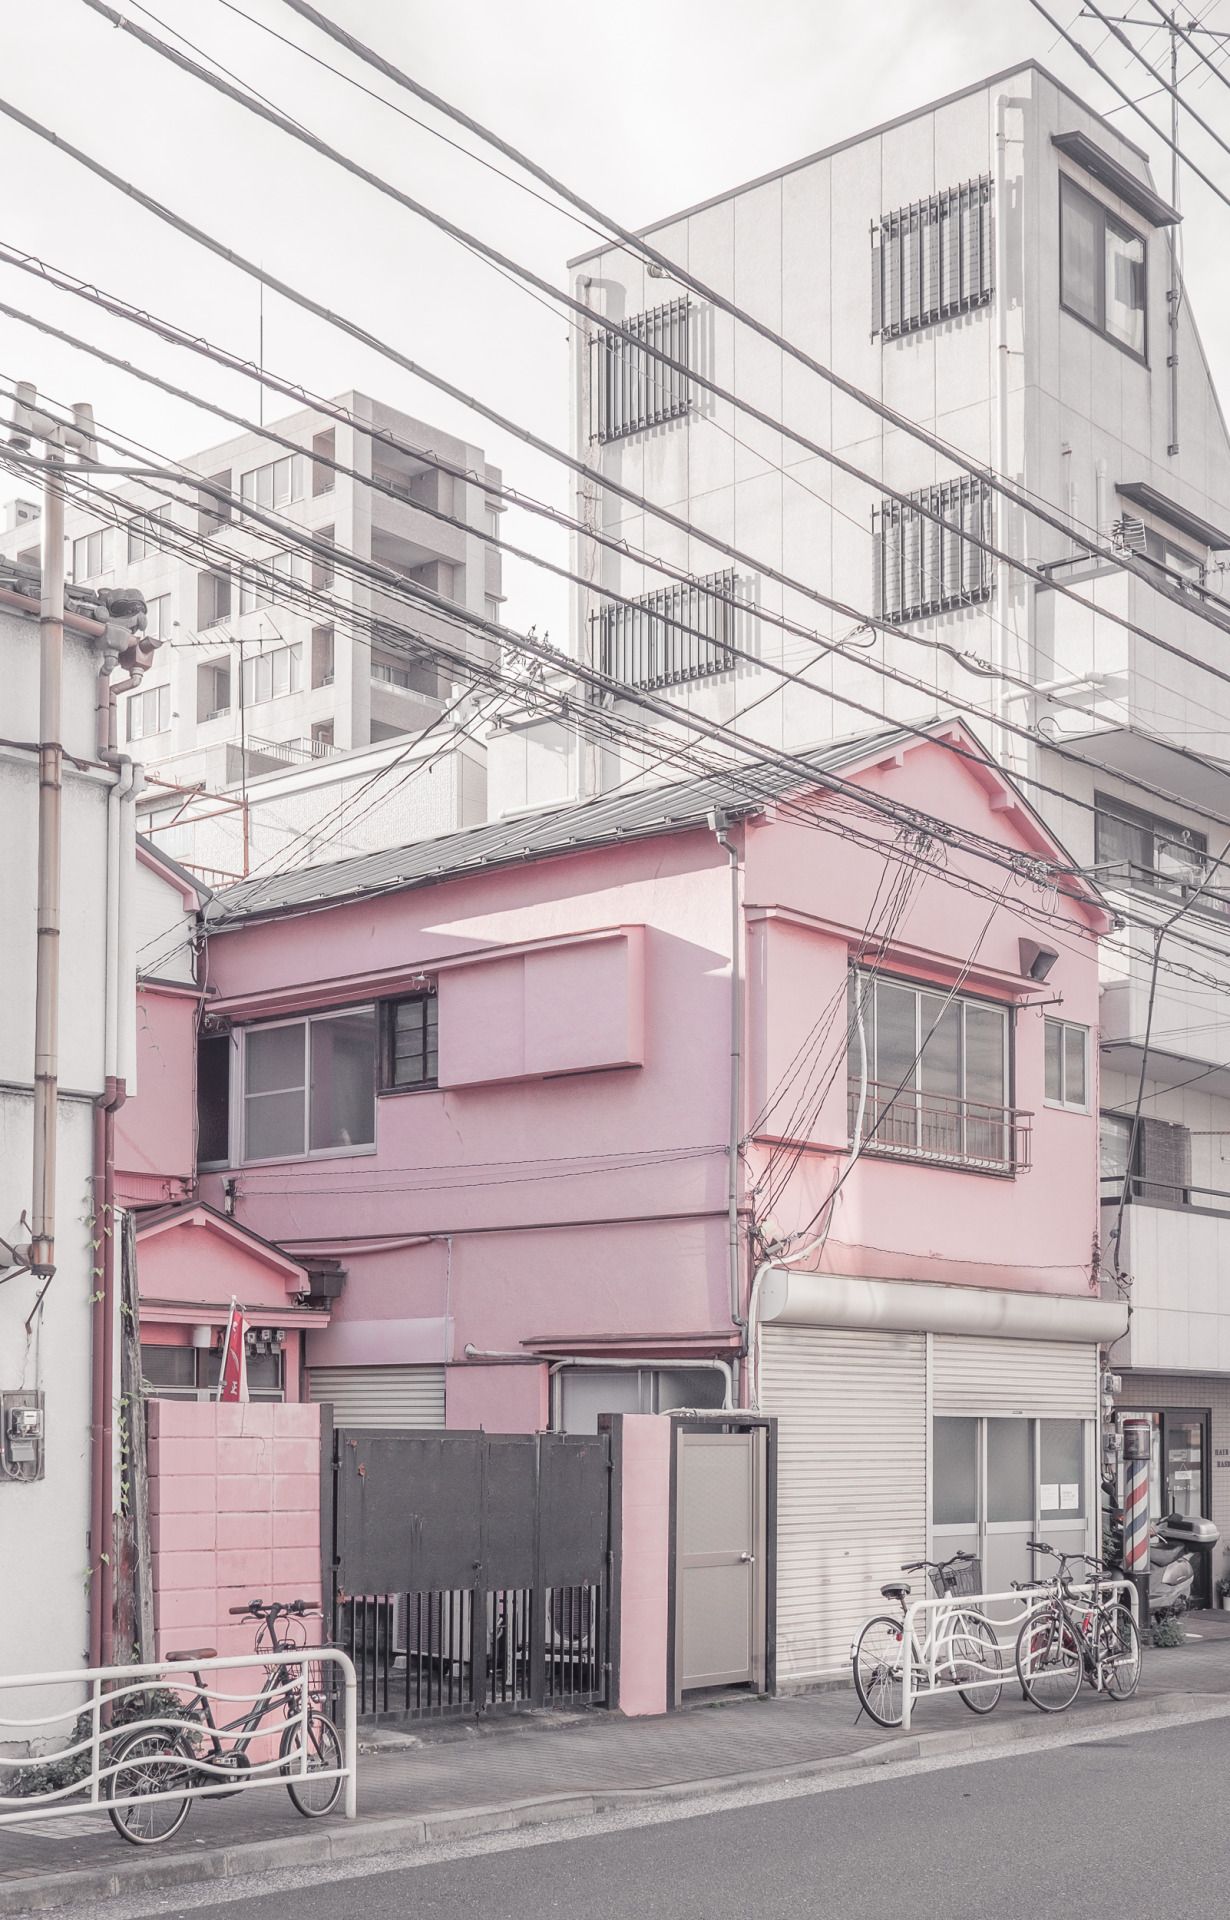 A pink building with bikes parked in front of it - Japan, Seoul